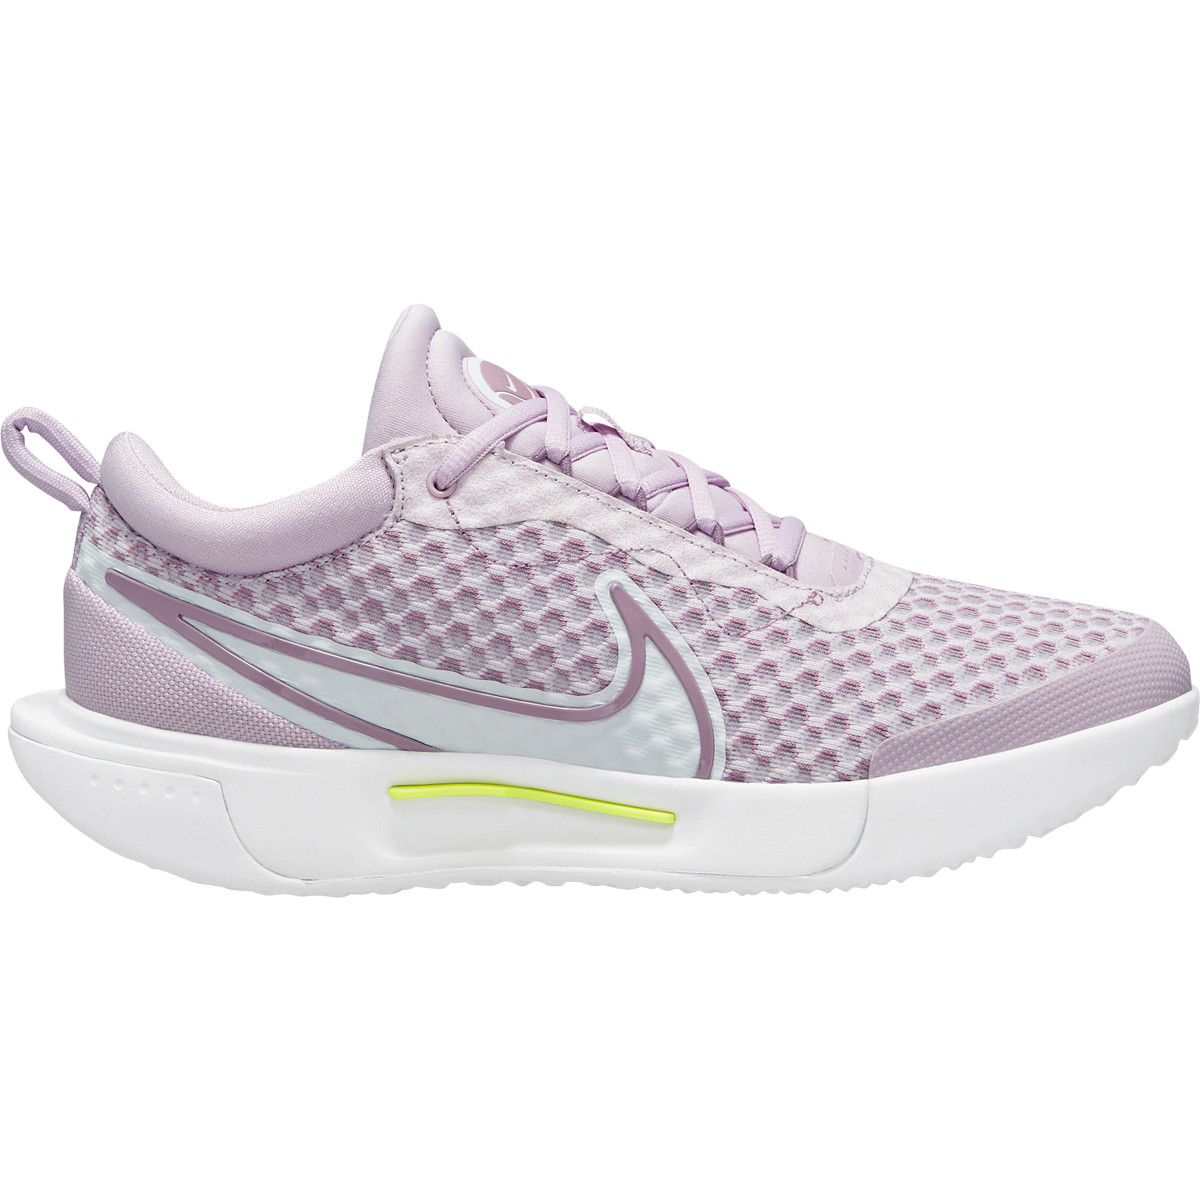 CHAUSSURES NIKE FEMME ZOOM COURT PRO SURFACES DURES